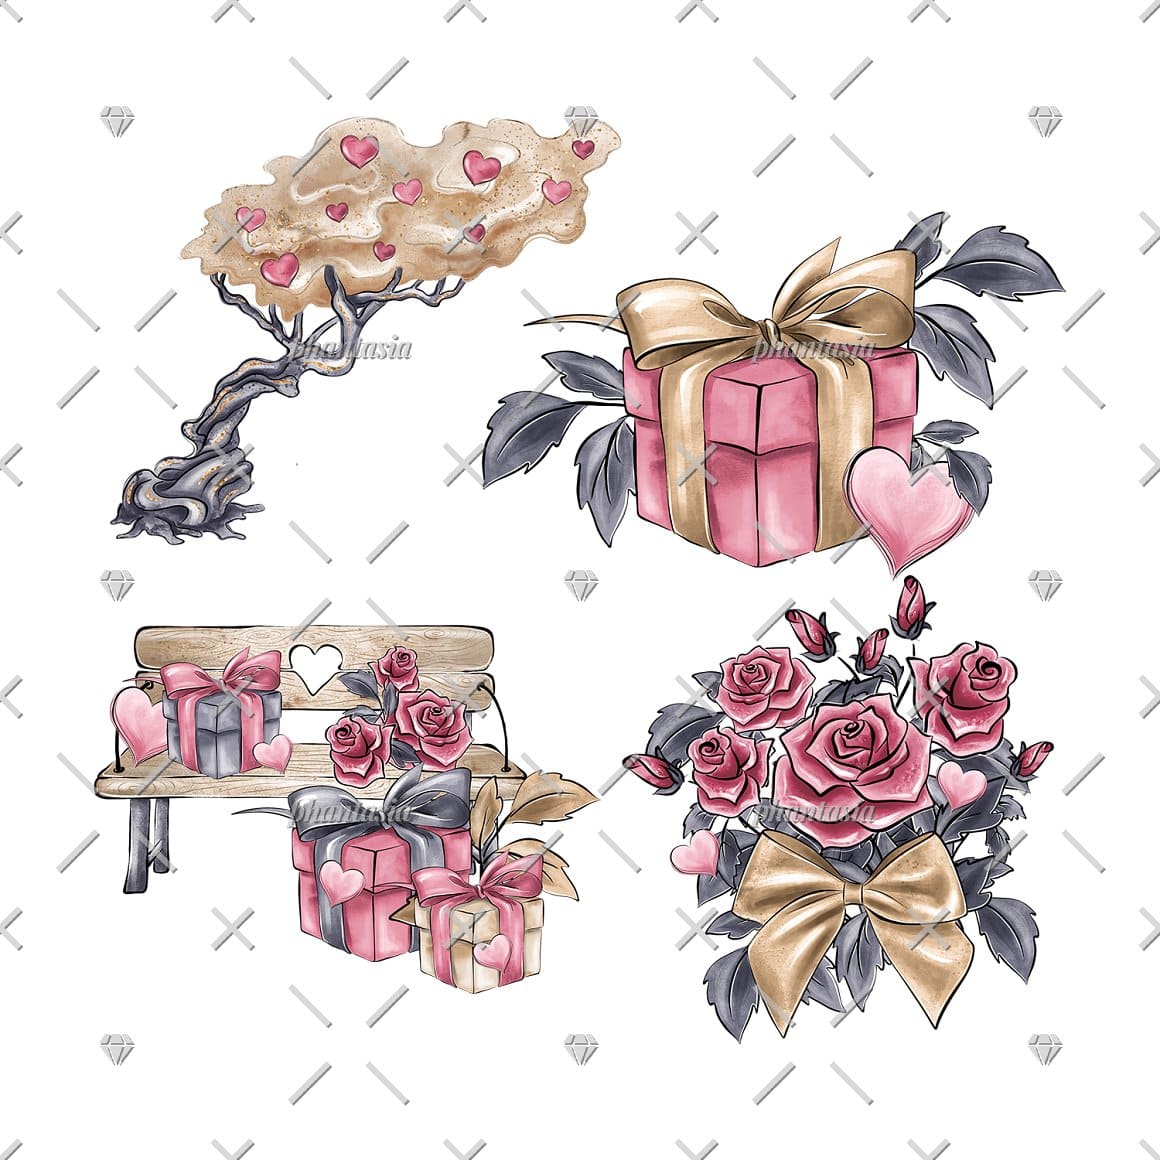 Image of Valentine's Day gifts in pink wrapping paper and flowers.